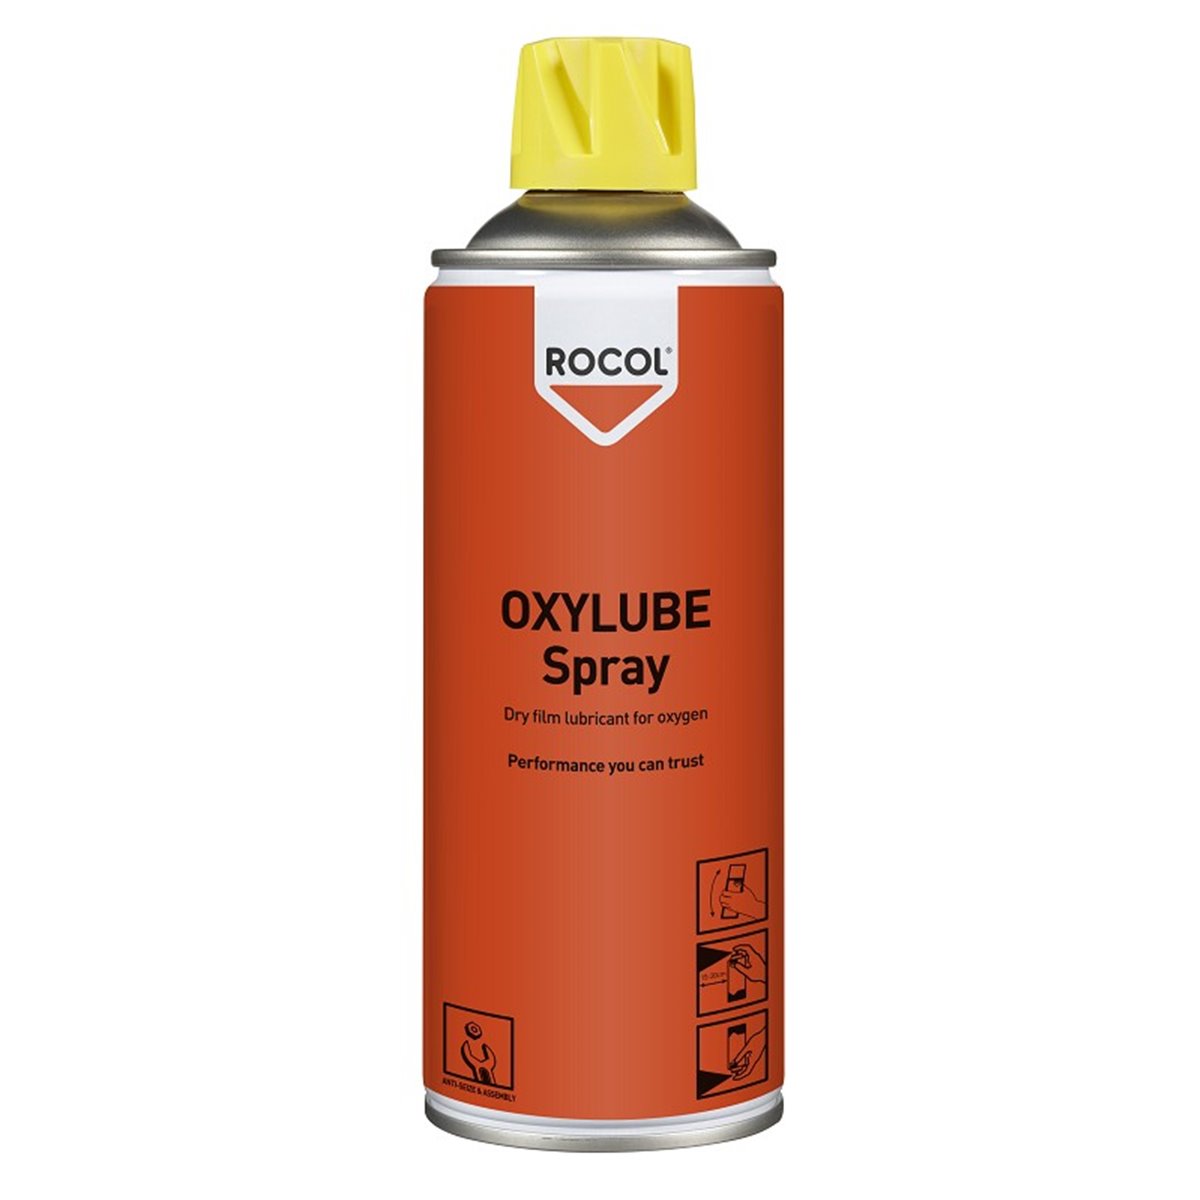 OXYLUBE Spray Rocol 400ml RS10125